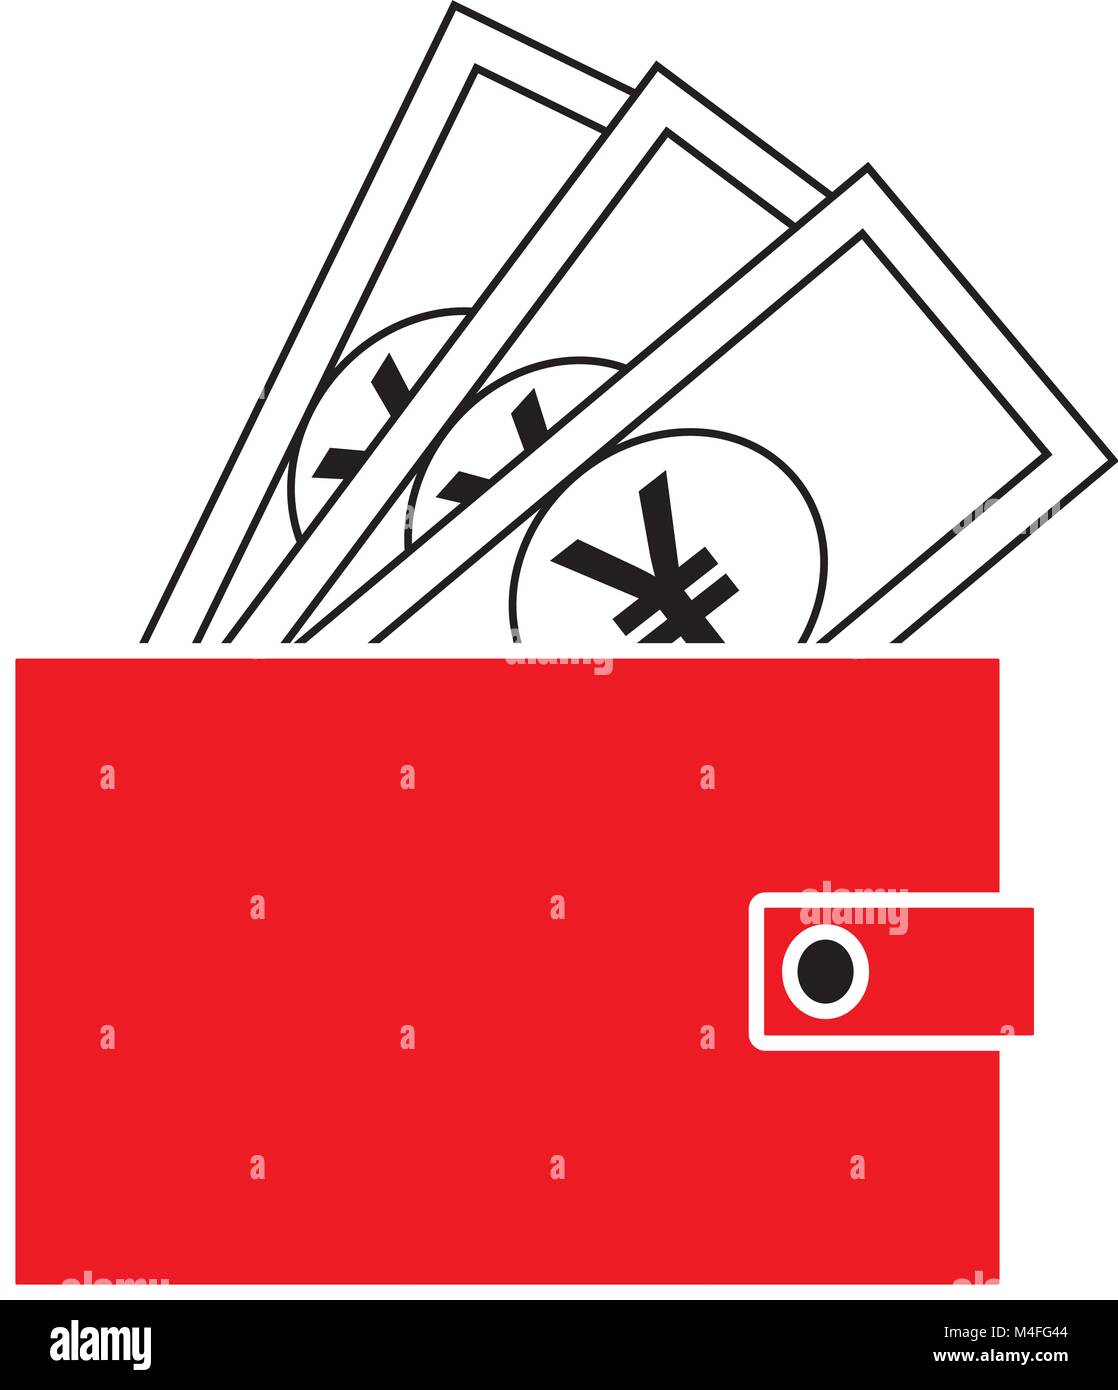 Yen, Yuan or Renminbi currency icon or logo vector on notes popping out of a wallet. Symbol for Japanese or Chinese bank, banking or Japan and China f Stock Vector